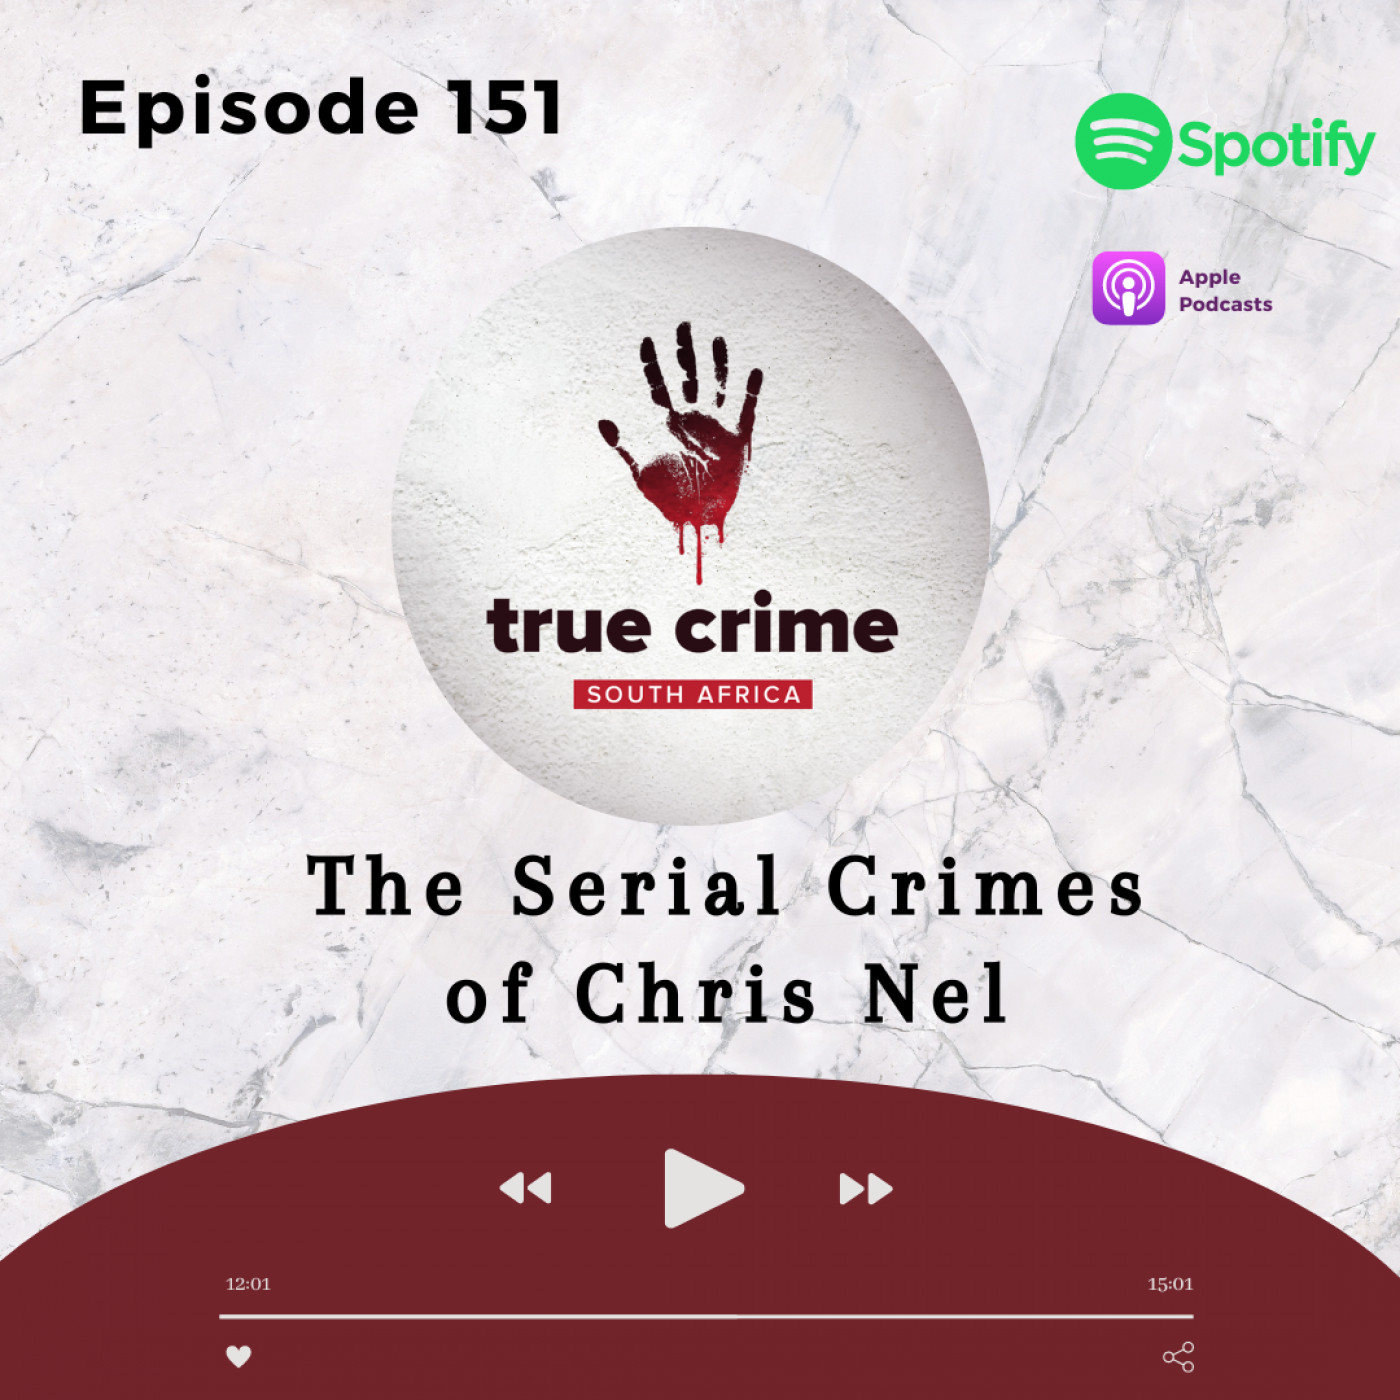 Episode 151 The Serial Crimes of Chris Nel